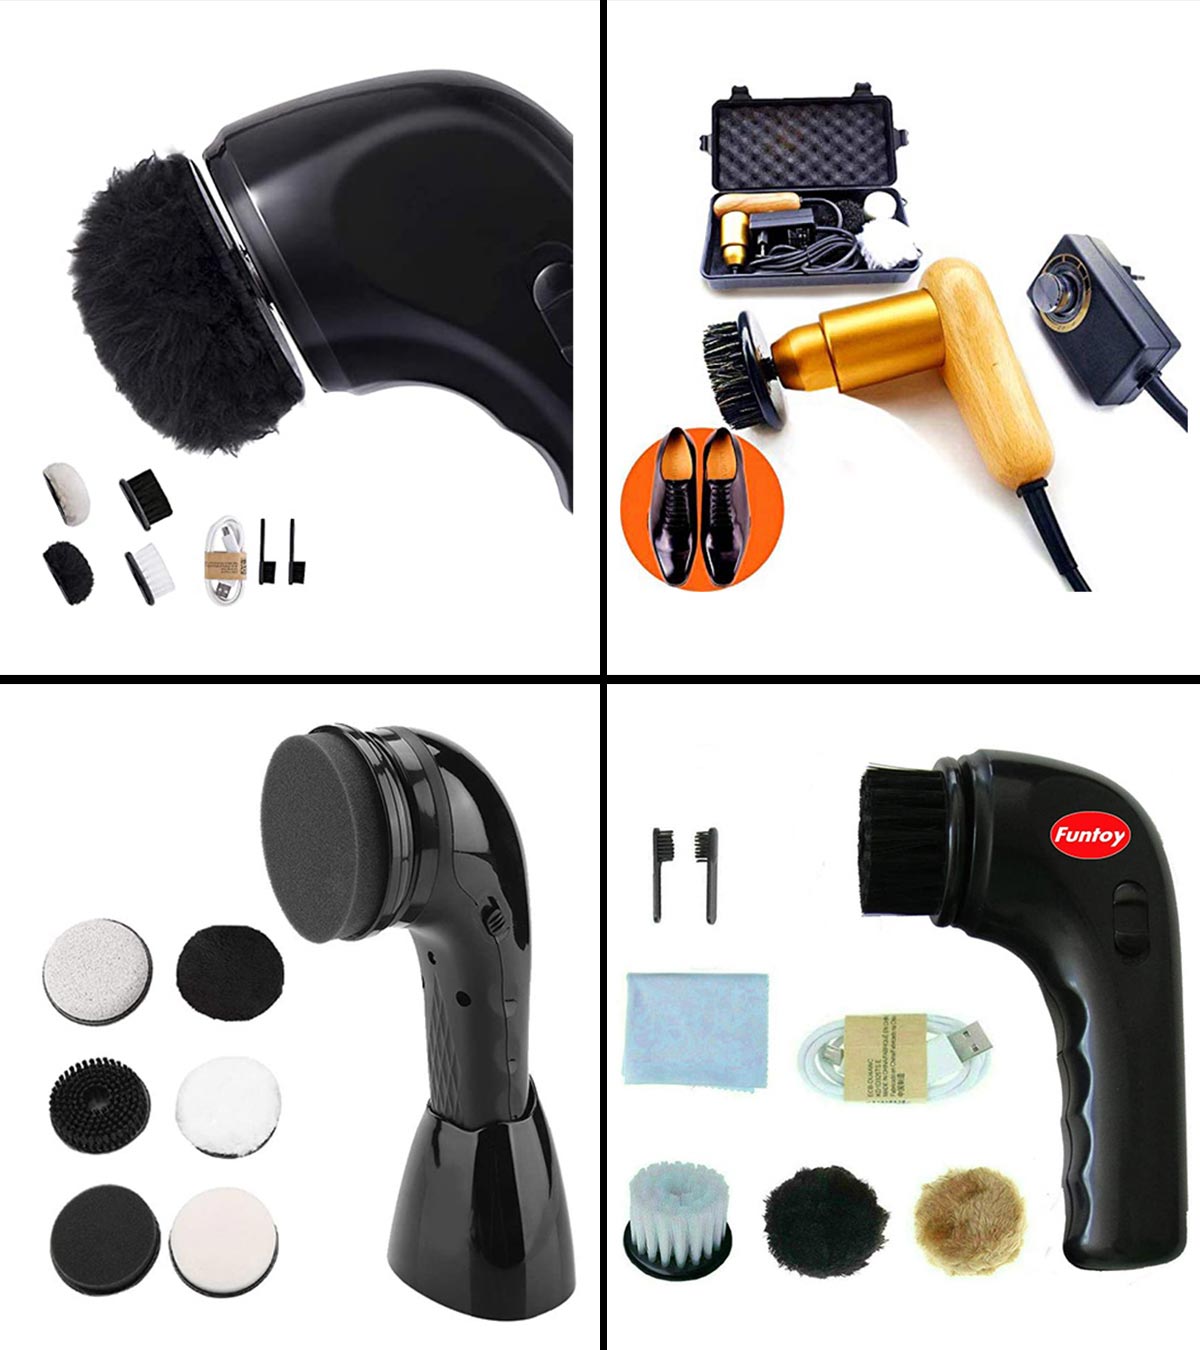 Handheld Shoe Cleaning Brush with 6 Replacement Brush Heads gaeruite Electric USB Shoes Polisher,Shoes Cleaning Brush Shoe Shine Kit for Boot 